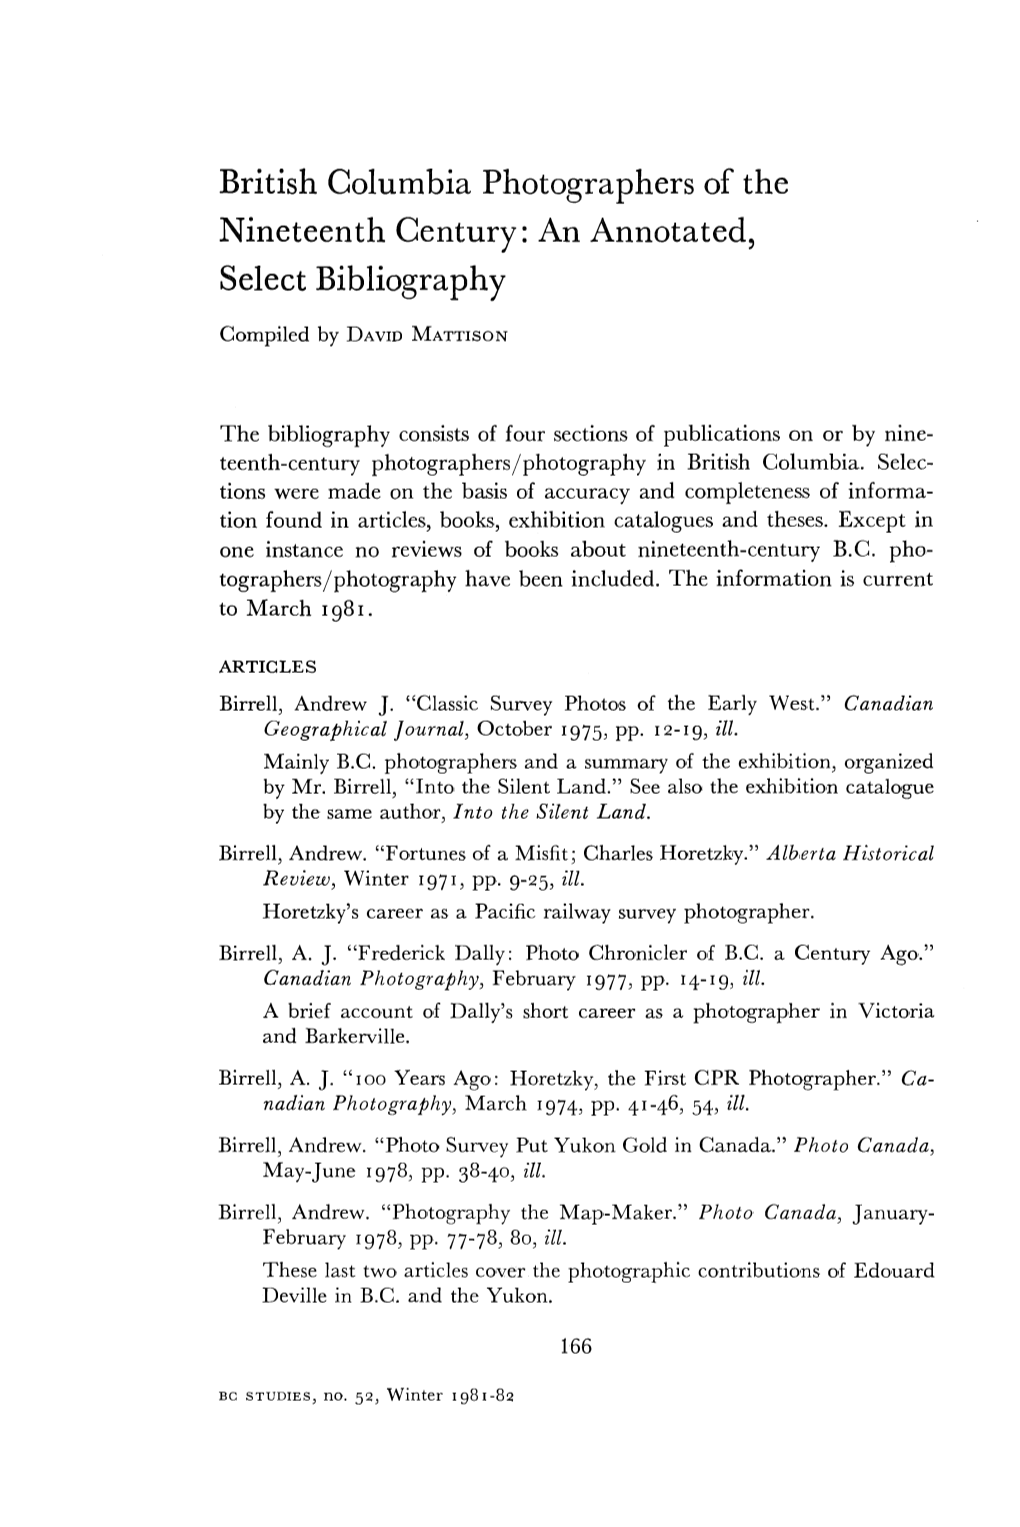 British Columbia Photographers of the Nineteenth Century: an Annotated, Select Bibliography